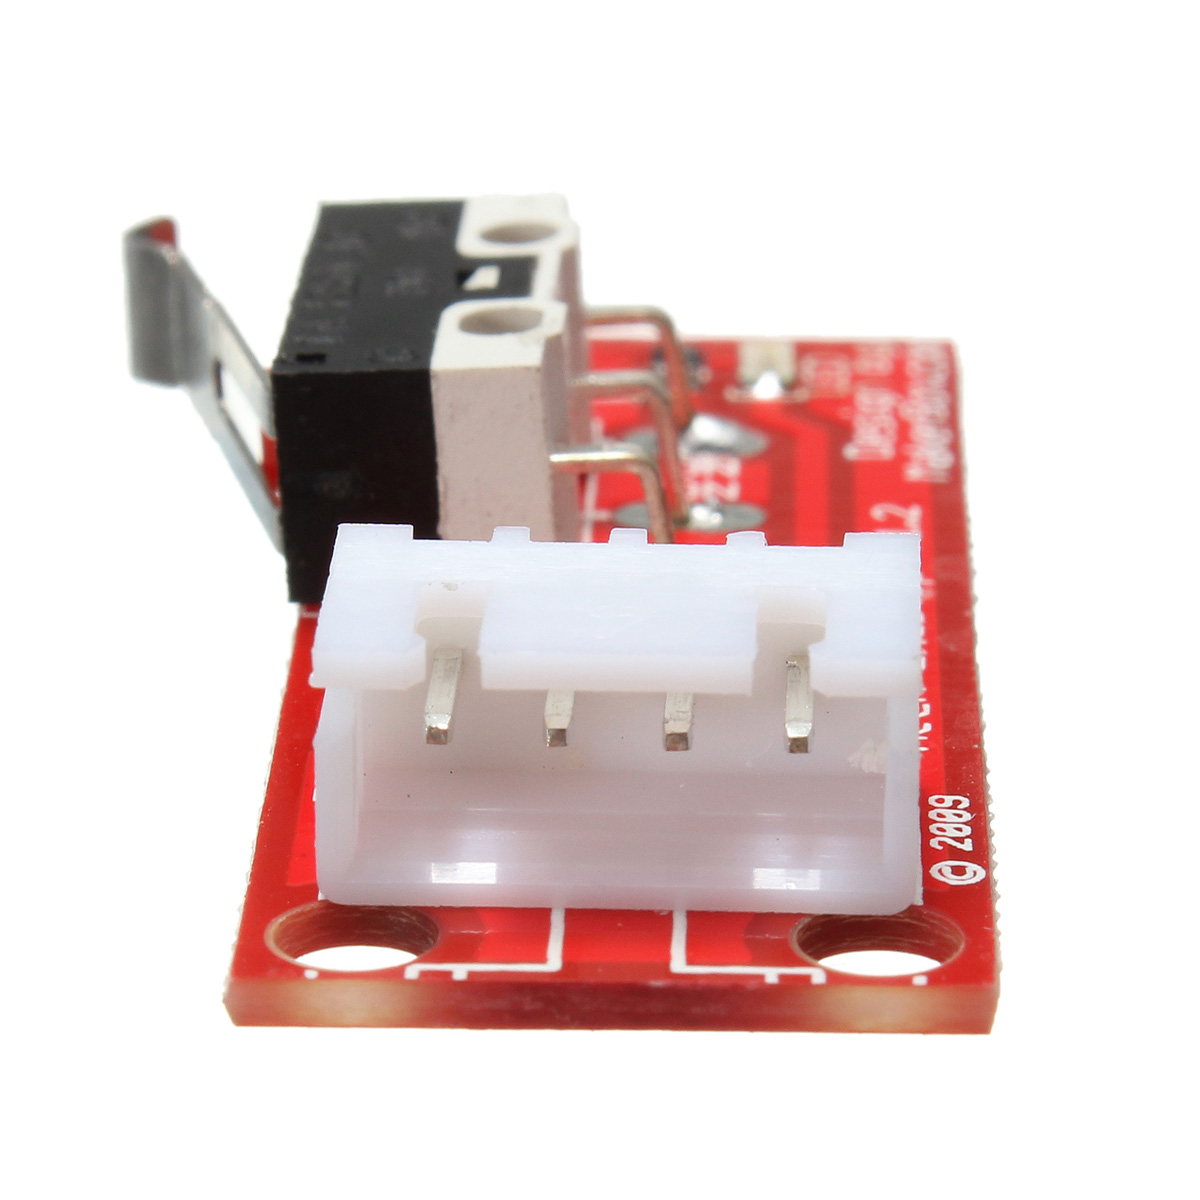 RAMPS 1.4 Endstop Switch For RepRap Mendel 3D Printer With 70cm Cable 10